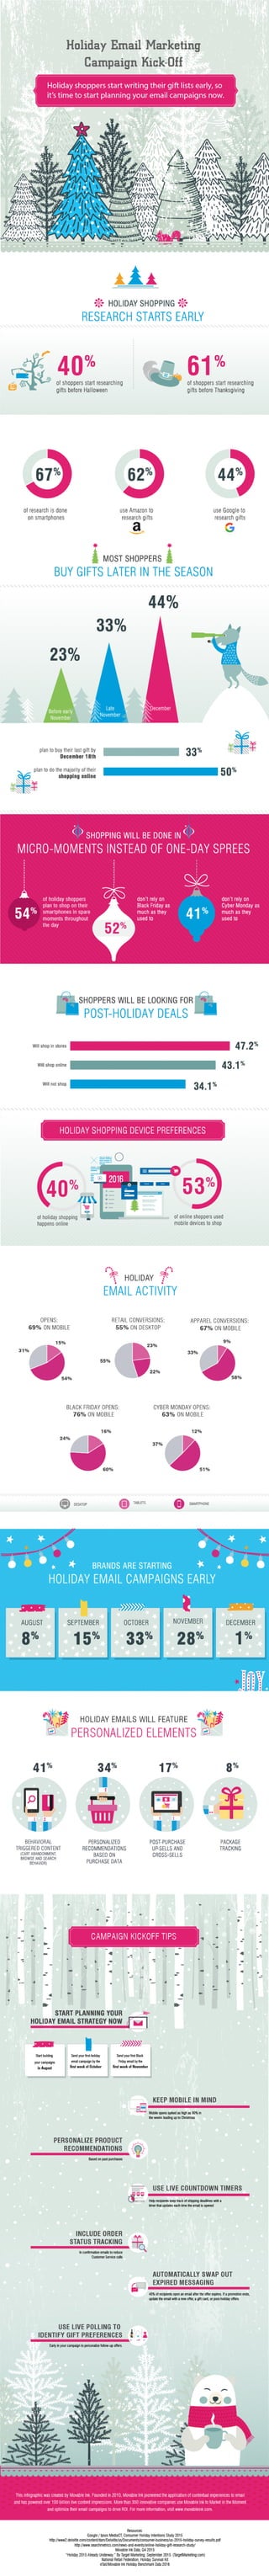 Holiday email campaign kickoff infographic